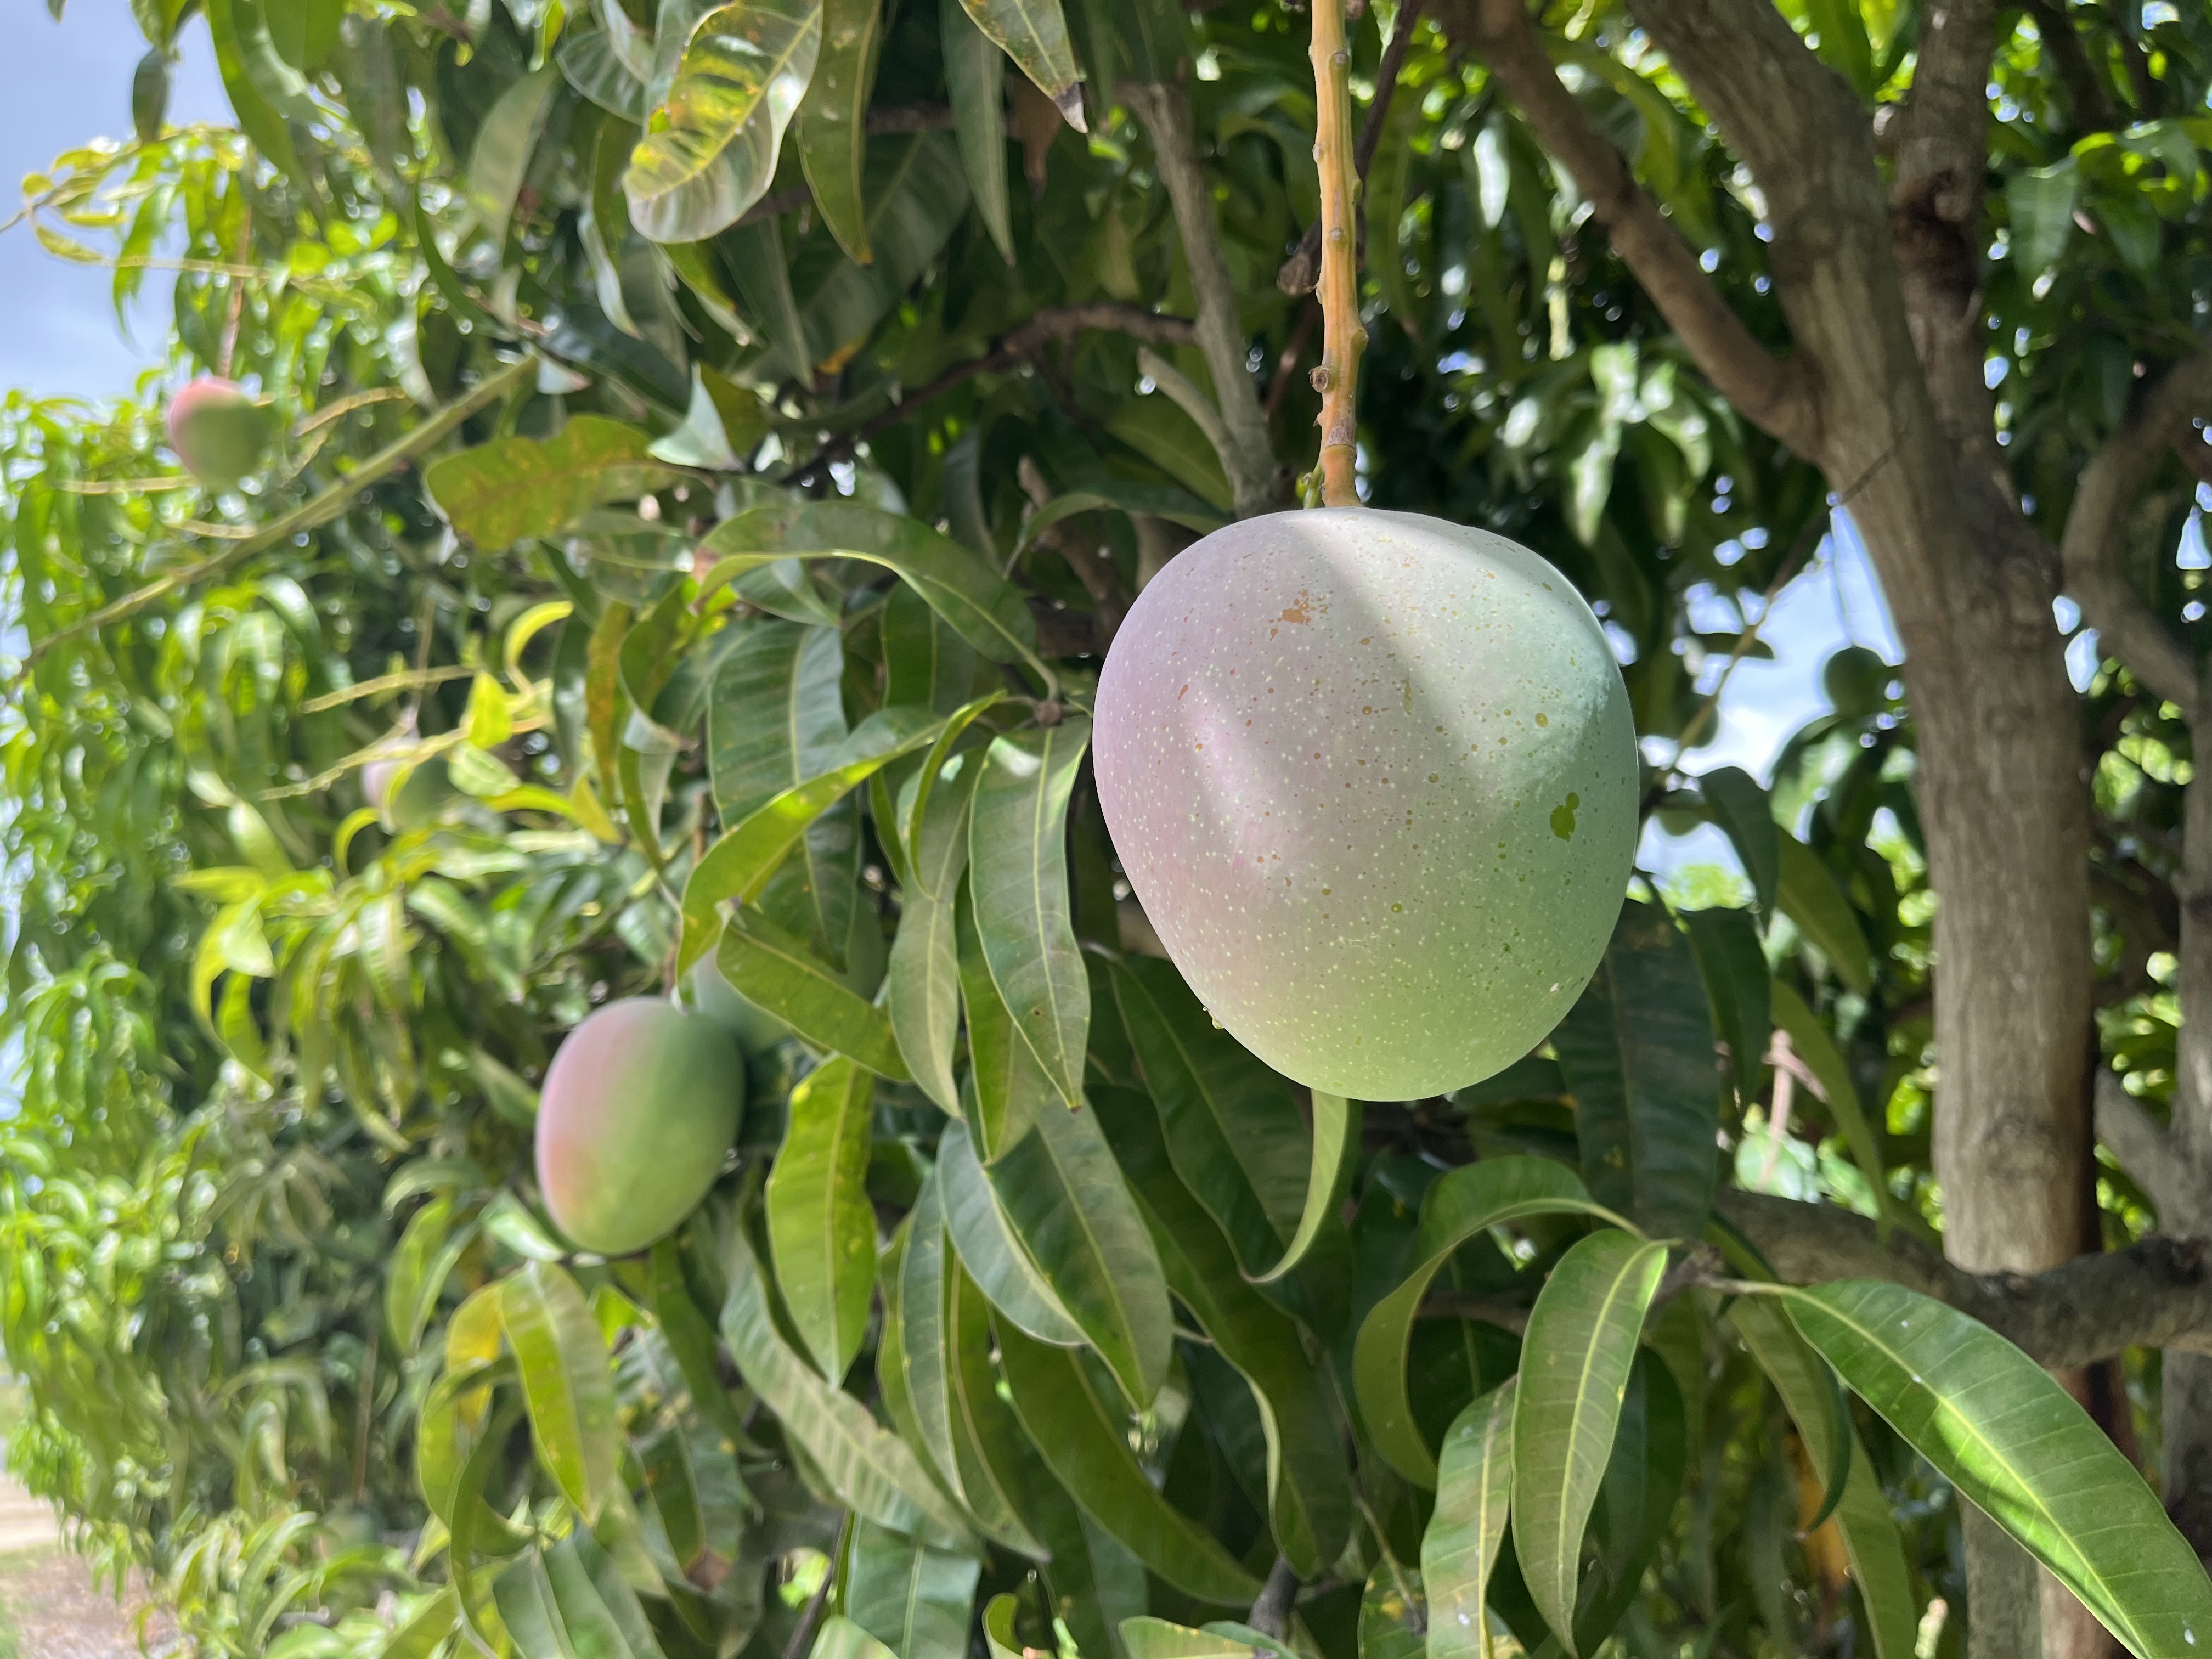 The mango is hanging to the tree